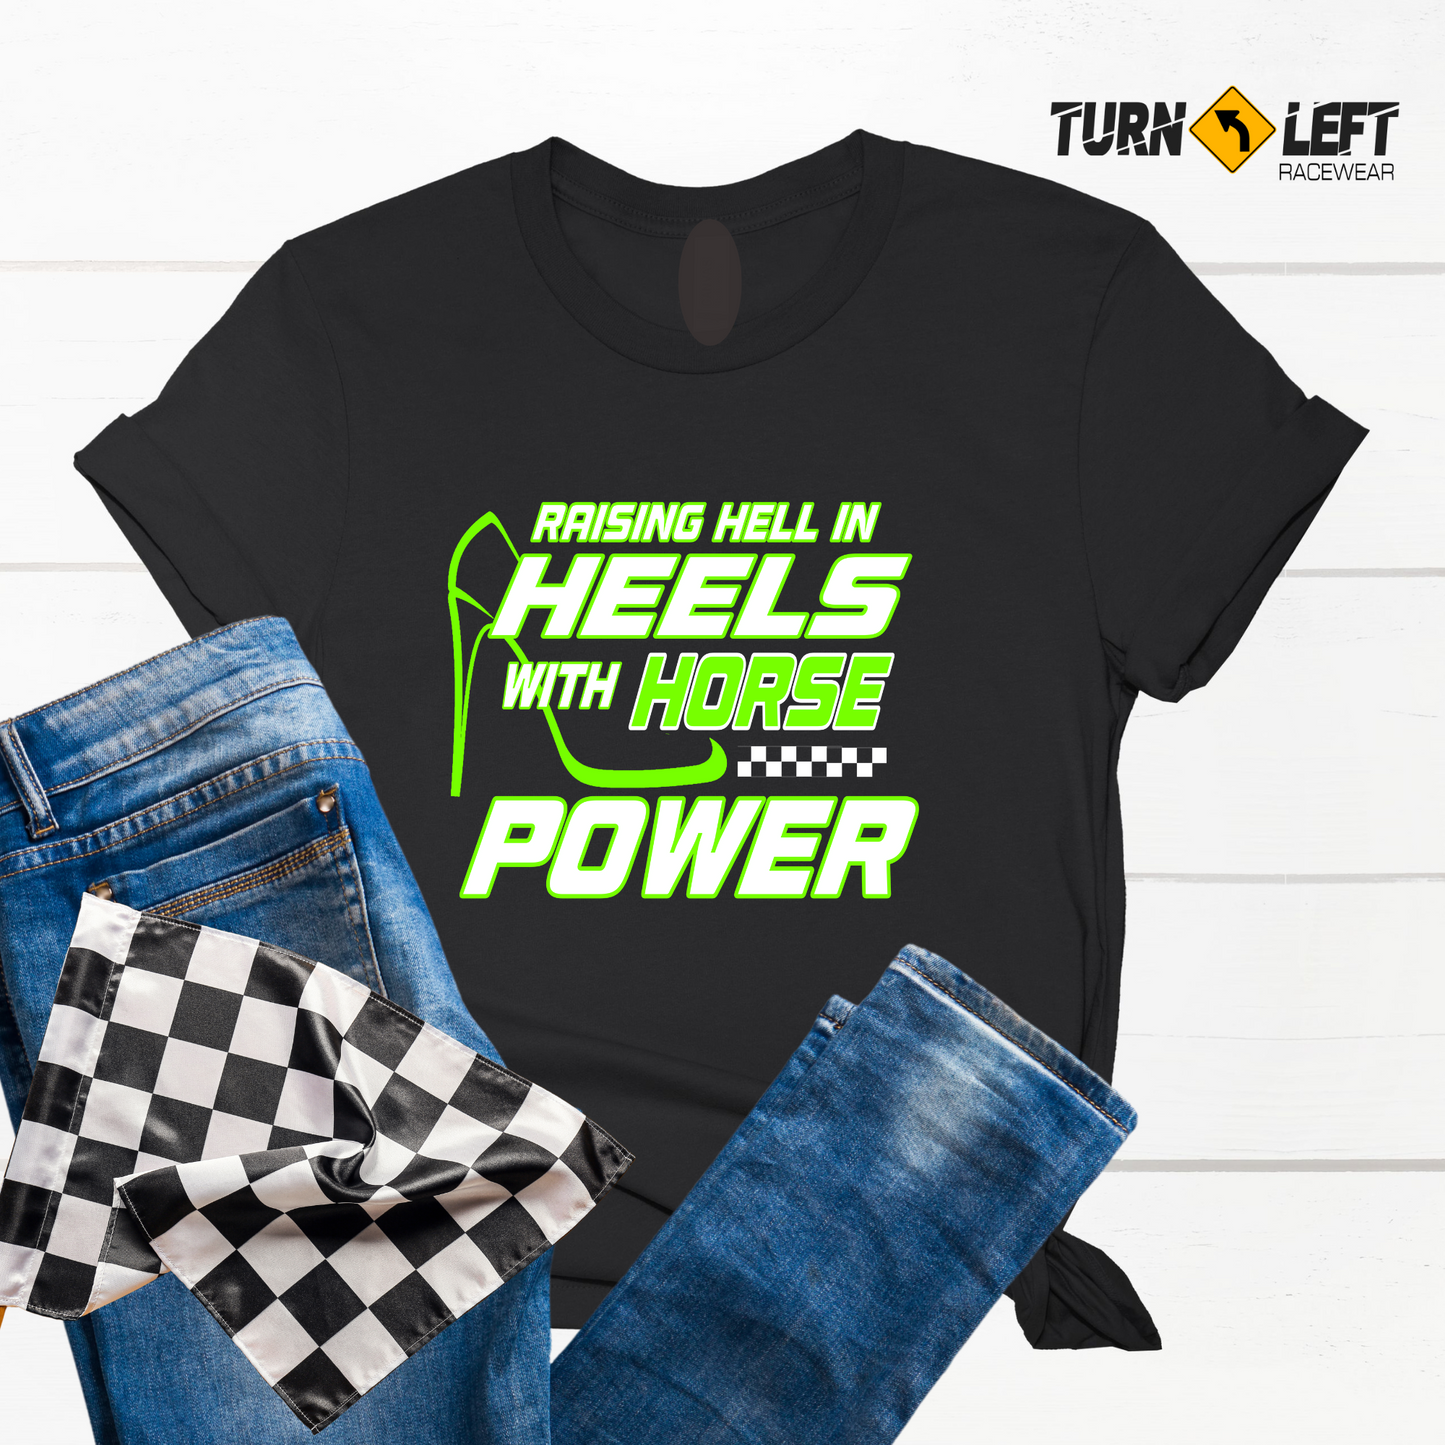 Raising Hell In Heels With Horsepower T-shirts. Women race car driver shirts for all her checkered flag racing events.